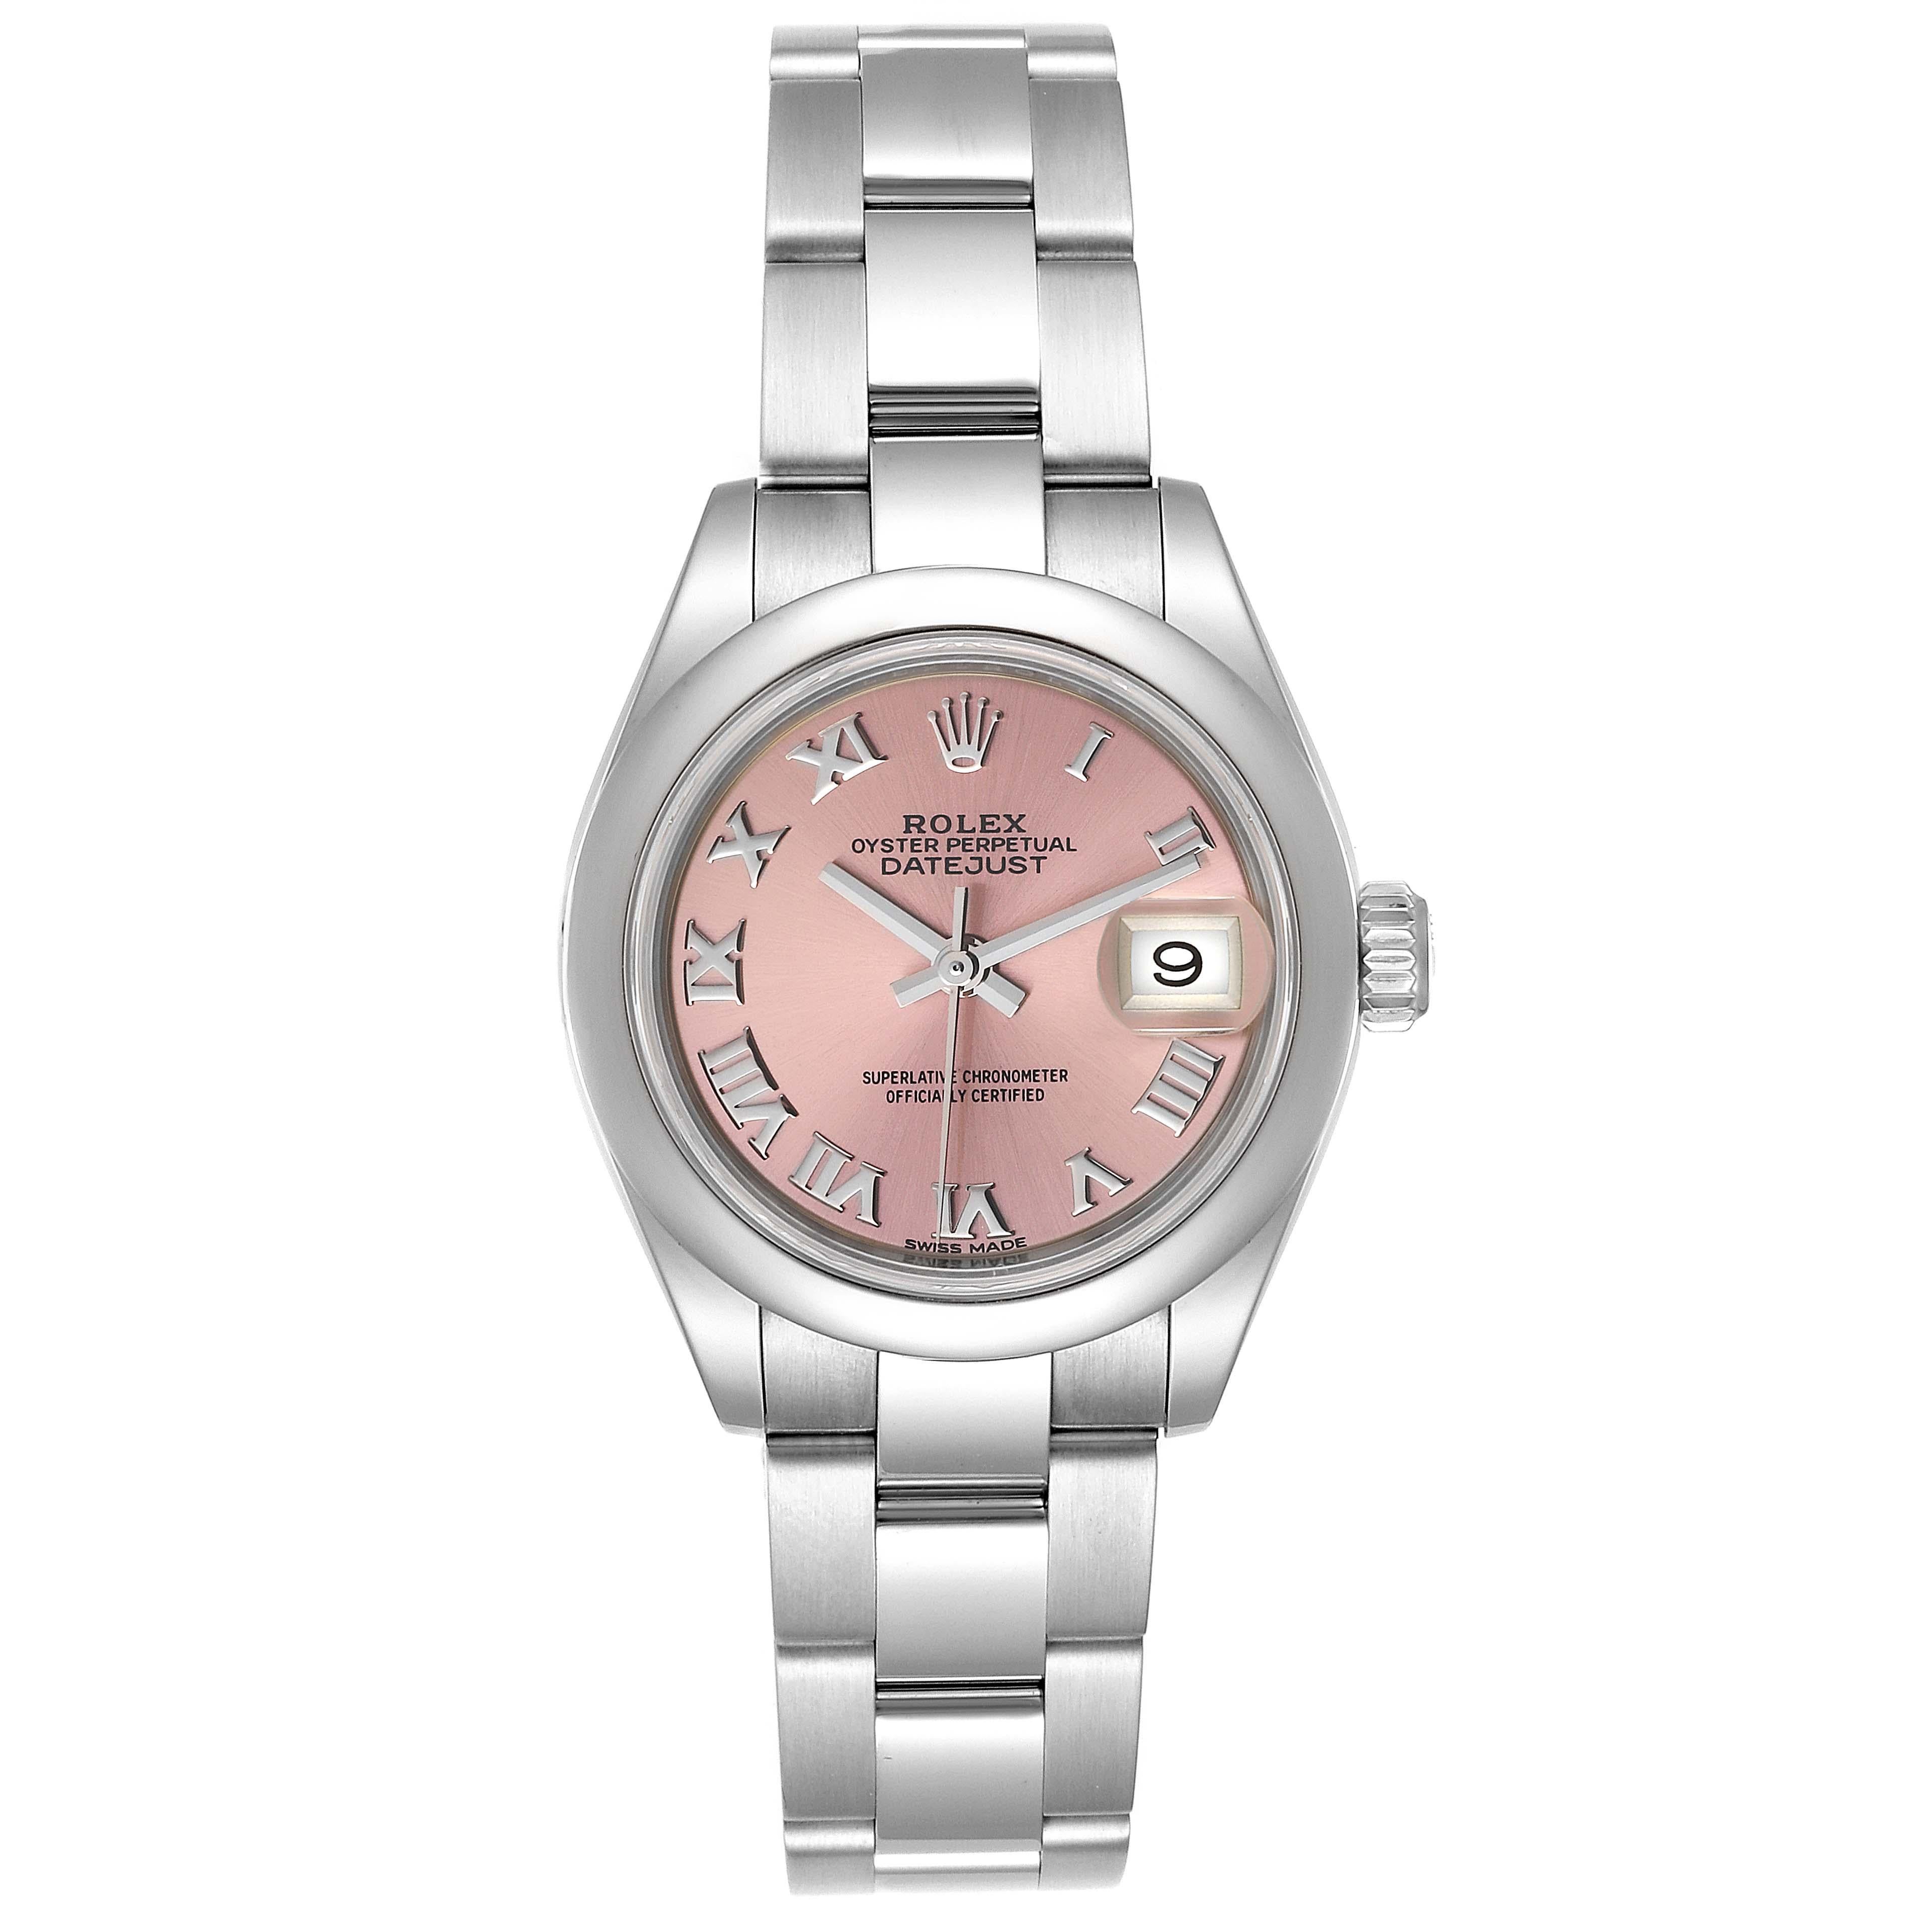 Rolex Datejust 28 Pink Dial Oyster Bracelet Steel Ladies Watch 279160. Officially certified chronometer self-winding movement. Stainless steel oyster case 28 mm in diameter. Rolex logo on a crown. Stainless steel smooth bezel. Scratch resistant